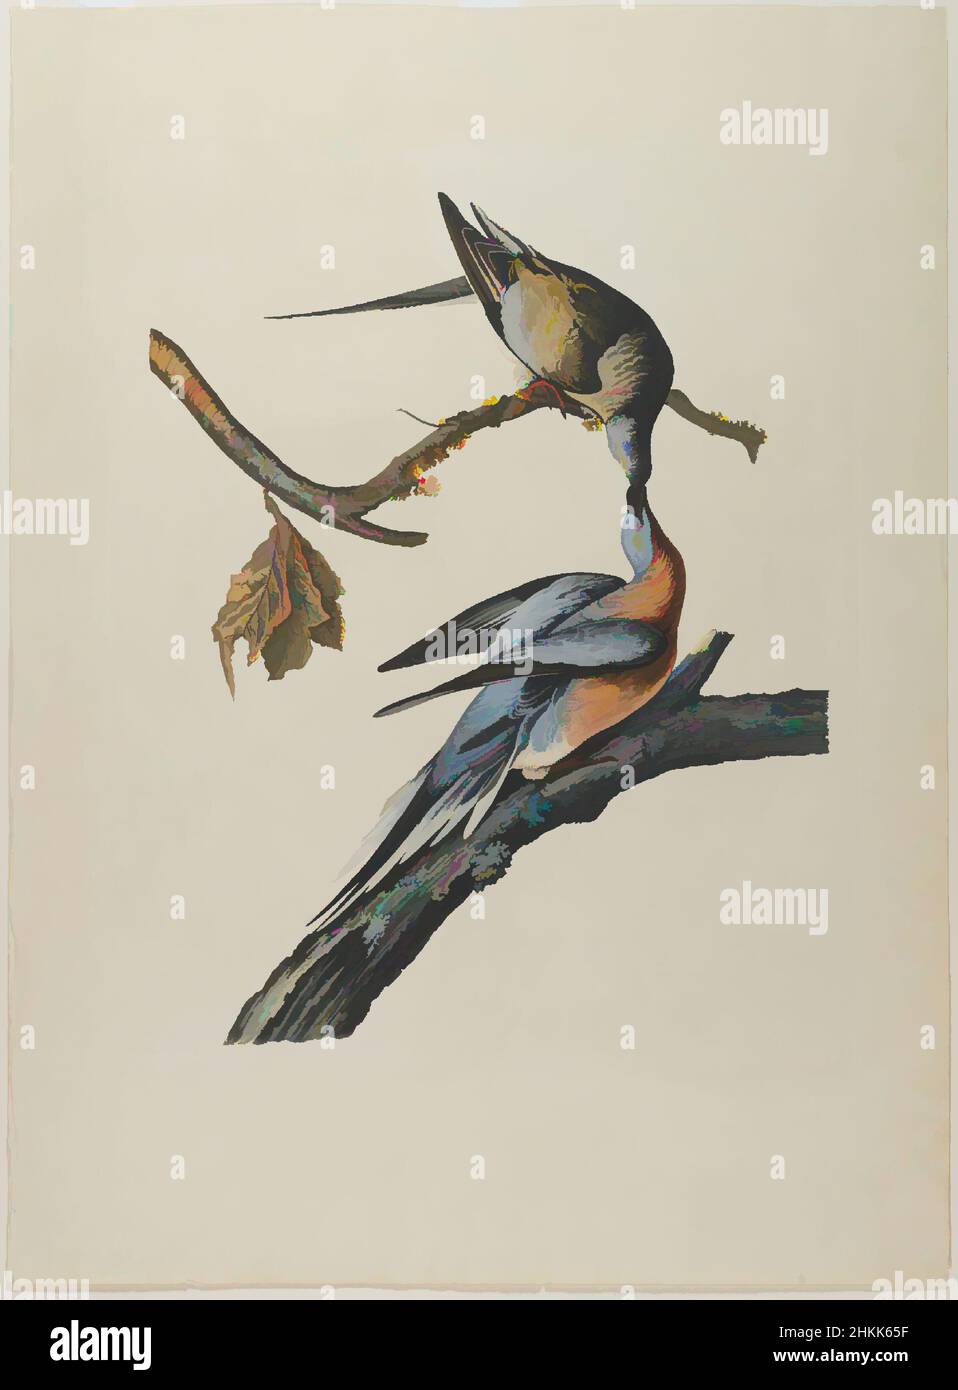 Art inspired by Passenger Pigeon, Aquatint, approx.: 27 x 40 in., 68.6 x 101.6 cm, animals, audubon, birds, eating, Ectopistes migratorius, extinct, extinct species, extinction, fauna, feeding, flora, hunting, Martha, mates, Nature, nature study, ornithology, over-hunted, pigeon, Classic works modernized by Artotop with a splash of modernity. Shapes, color and value, eye-catching visual impact on art. Emotions through freedom of artworks in a contemporary way. A timeless message pursuing a wildly creative new direction. Artists turning to the digital medium and creating the Artotop NFT Stock Photo